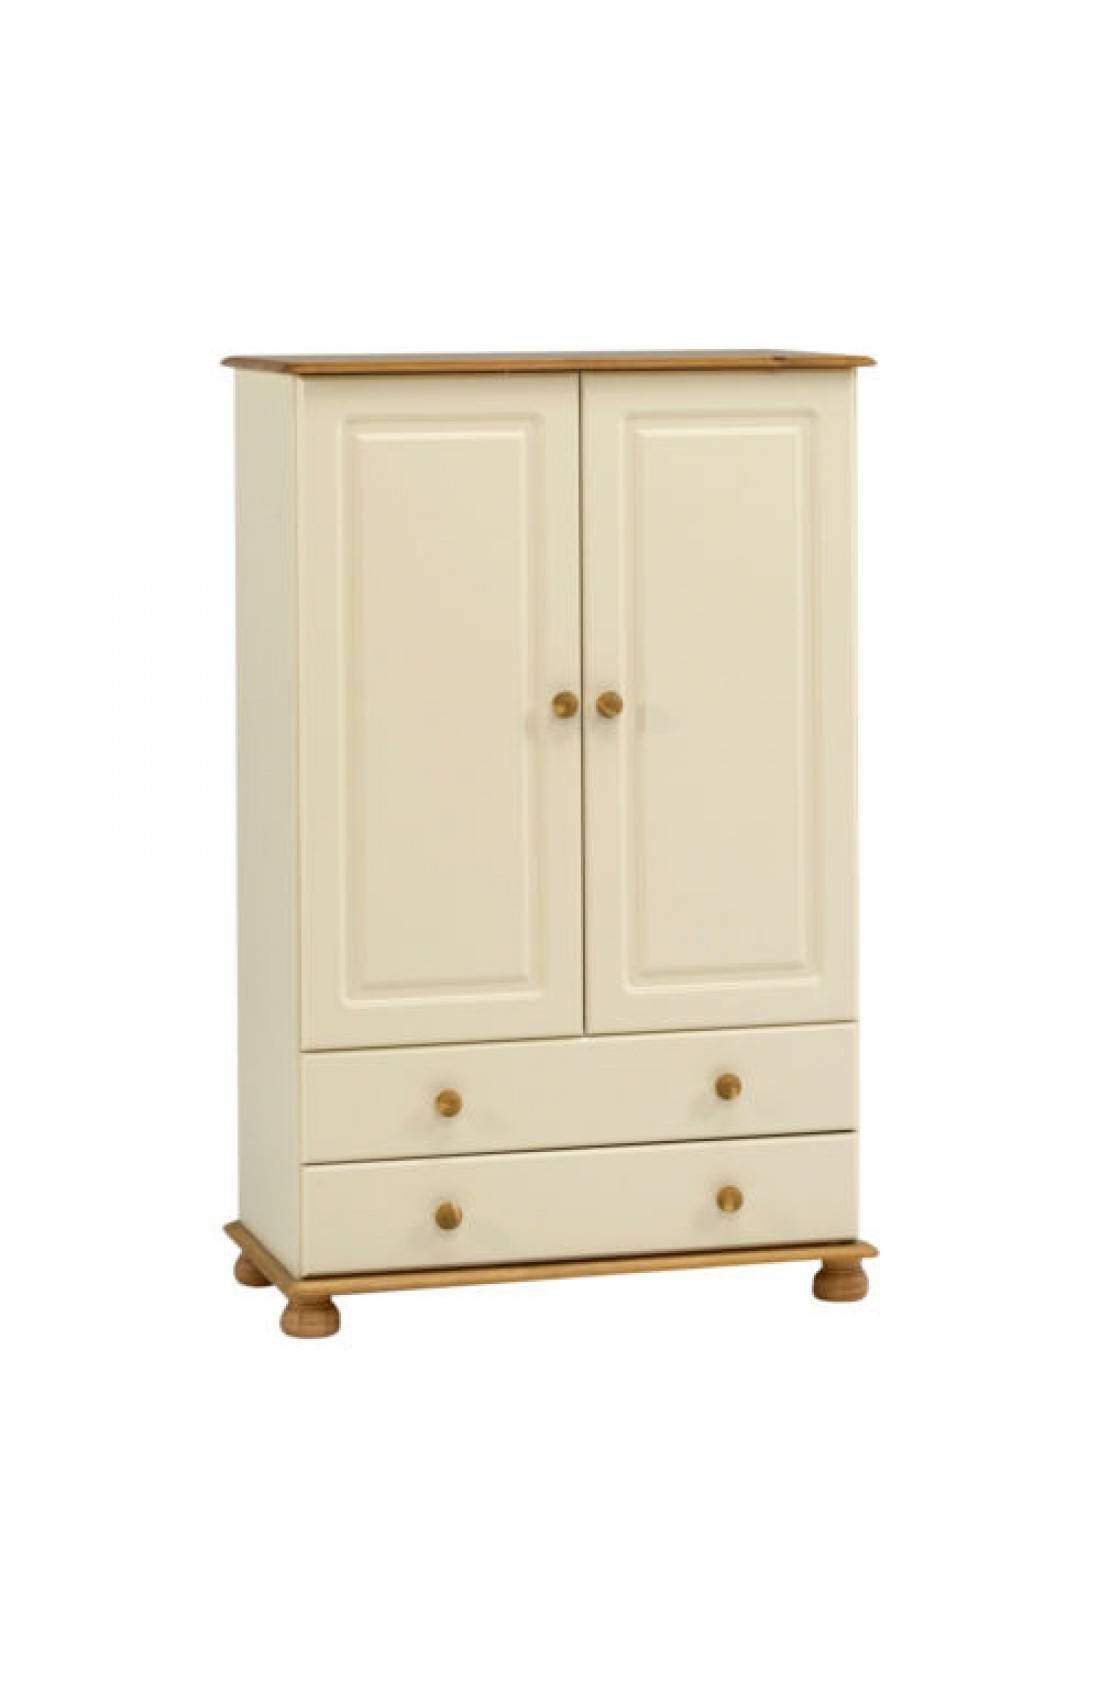 Richmond 2 Door 2 Drawer Short Low Tallboy Wardrobe – Cream & Pine Intended For White And Pine Wardrobes (View 15 of 15)